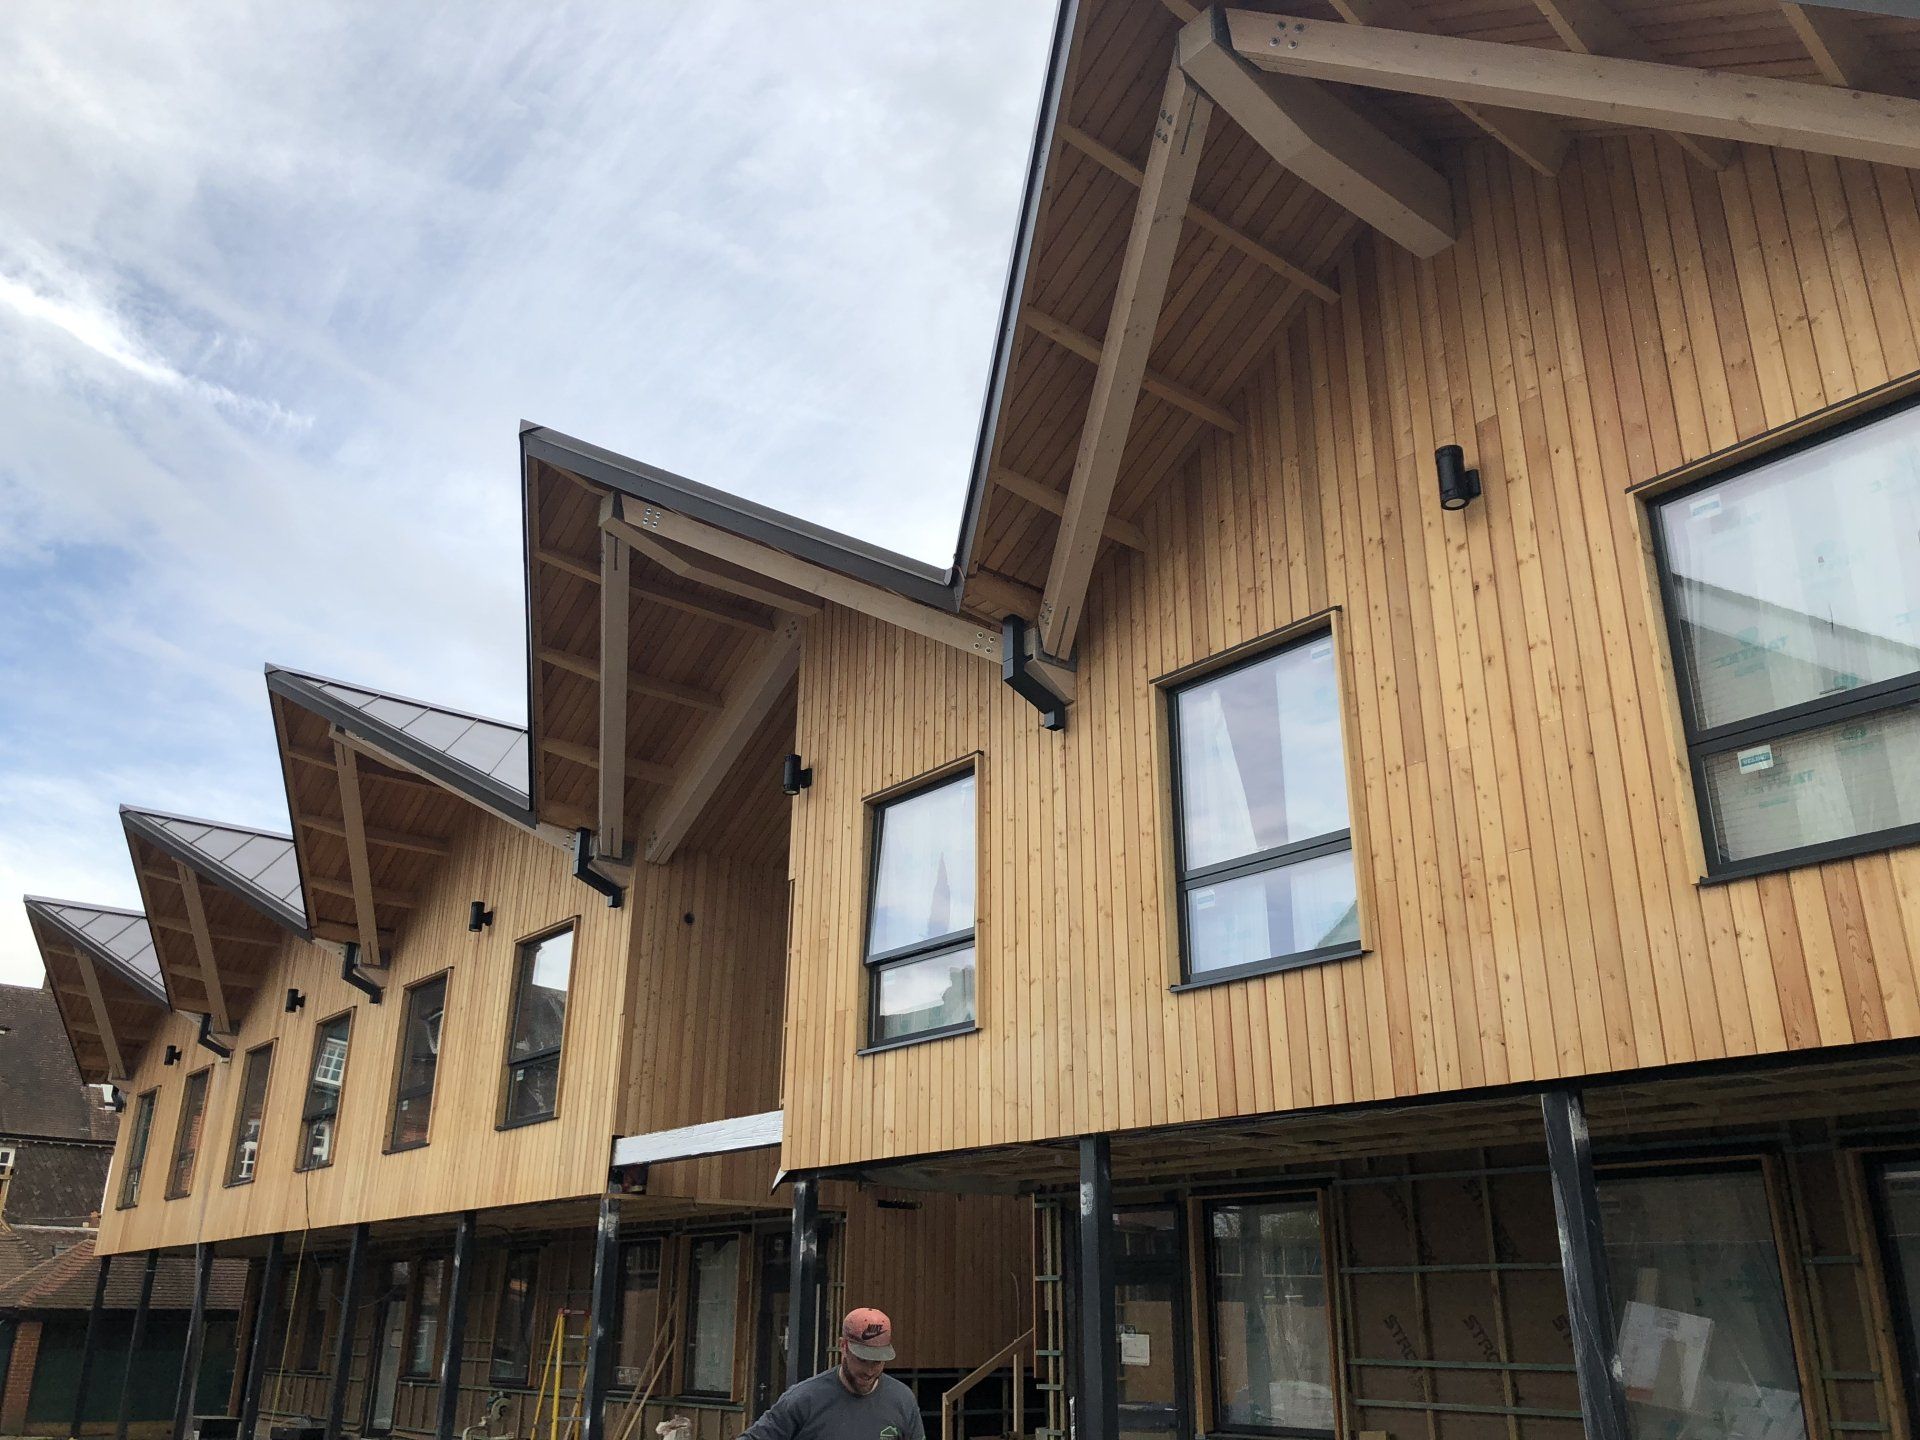 Cedar Cladding, Cranleigh Classrooms. Builder. Building contractor. Construction. Carpentry. Carpentry contractor. Extensions. New builds. Timber frame fabrication and erection. Design and build. Kitchen installations. Horsham. Surrey. Reigate. Redhill. Dorking. Crawley. West Sussex. Cranleigh.